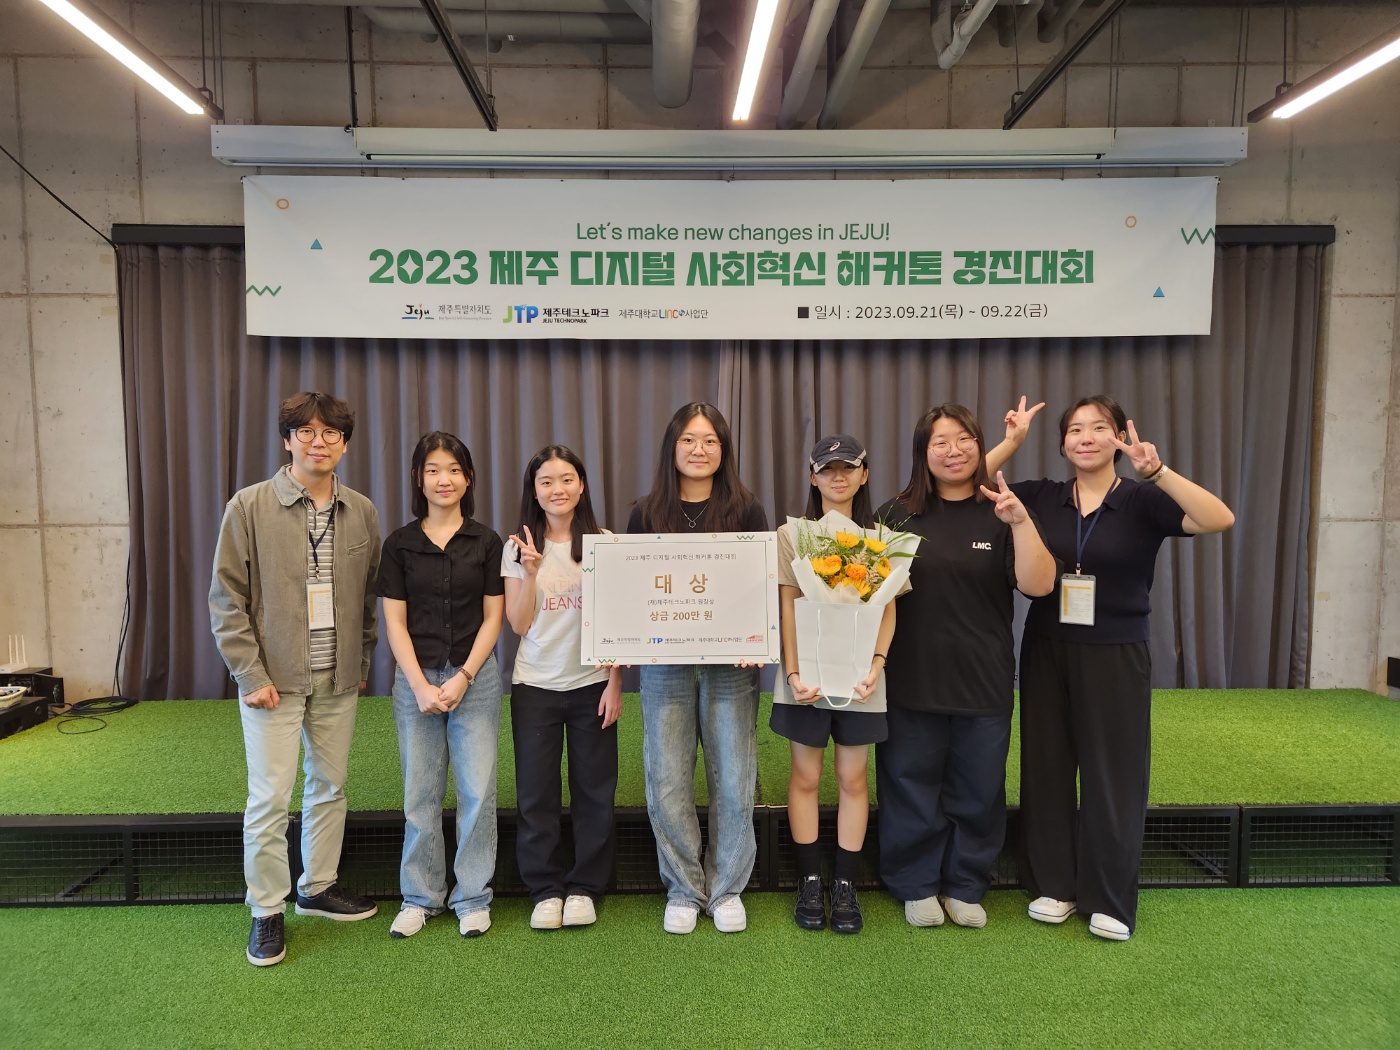 Sooa Kim, Computer Science Major, Wins 1st Place in a Hackathon Competition  at Jeju image